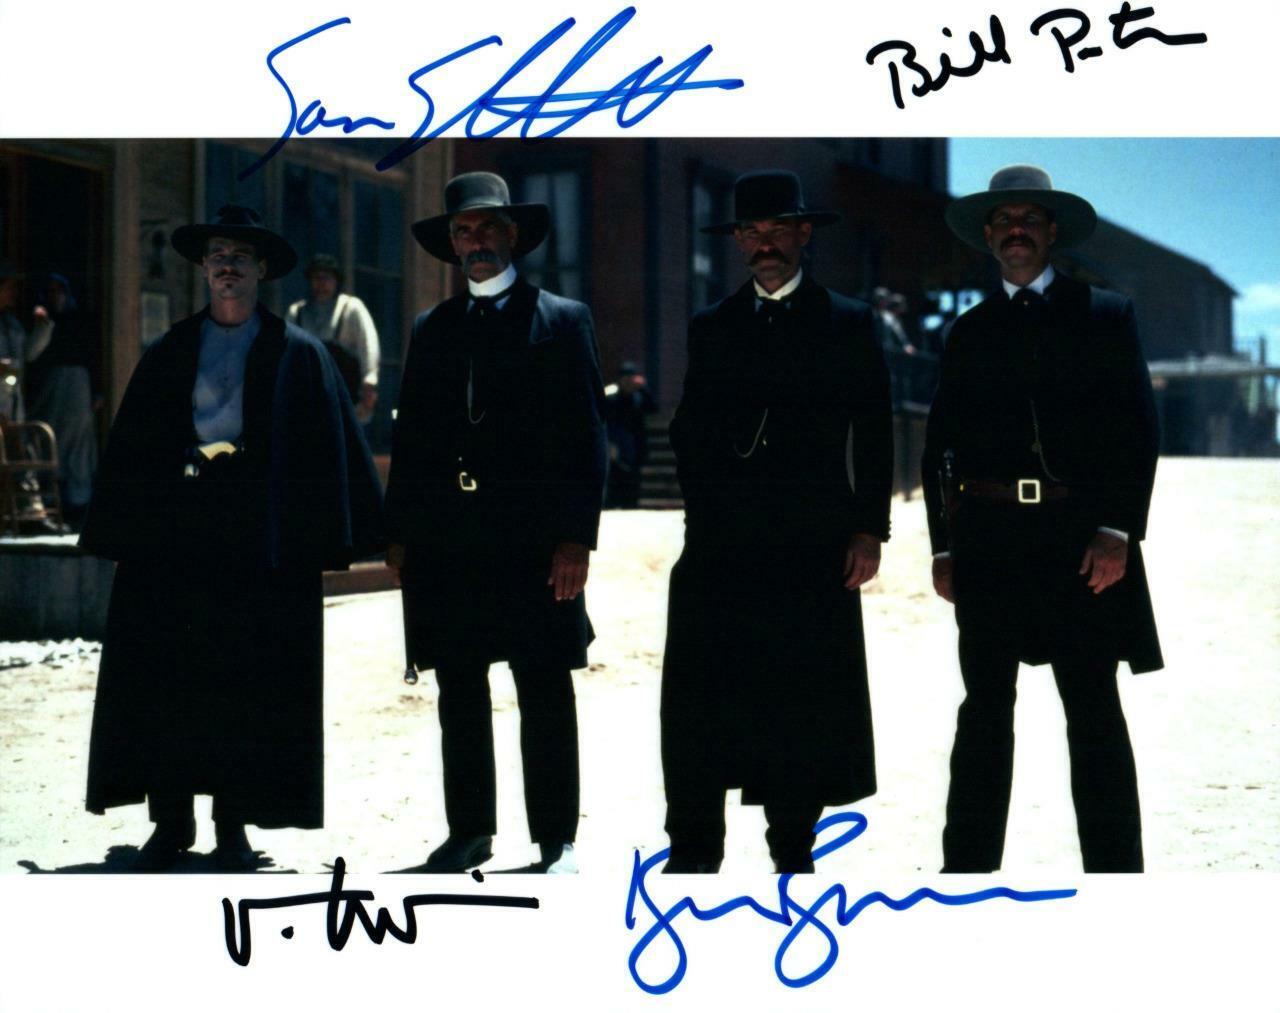 Bill Paxton Kilmer Russell Elliott Autographed 8x10 Photo Poster painting signed Picture + COA